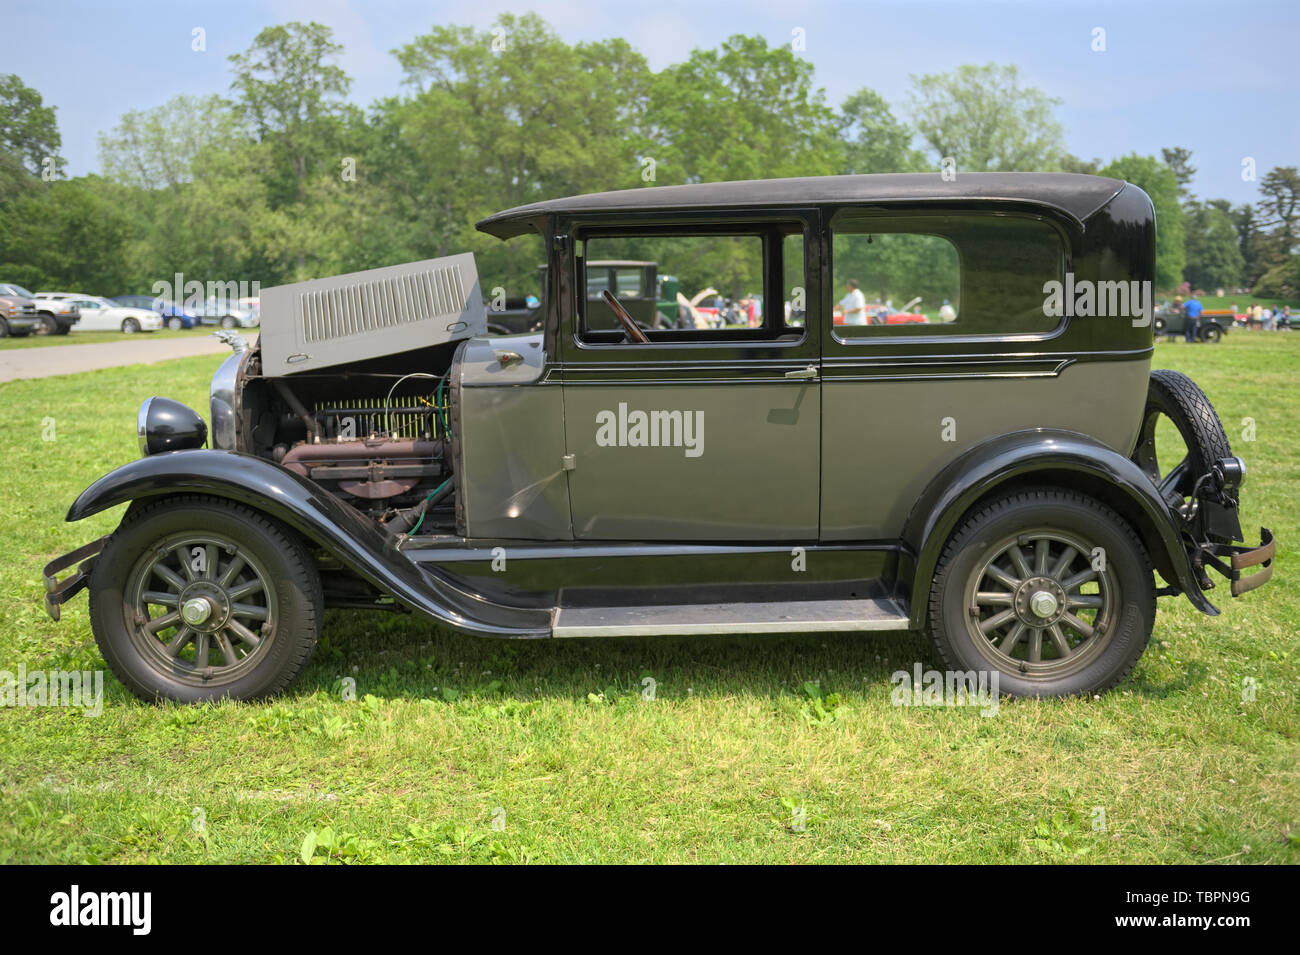 Old Westbury, New York, USA. 2nd June, 2019. The gray 1928 Studebaker Dictator, Club Sedan, owned by Keith Gramlich of East Meadow, is a vintage car entry on display with its hood folded open, at the 53rd Annual Spring Meet Antique Car Show, sponsored by the Greater NY Region (NYGR) of the Antique Car Club of America (AACA), at Old Westbury Gardens, a Long Island Gold Coast estate. Credit: Ann Parry/ZUMA Wire/Alamy Live News Stock Photo